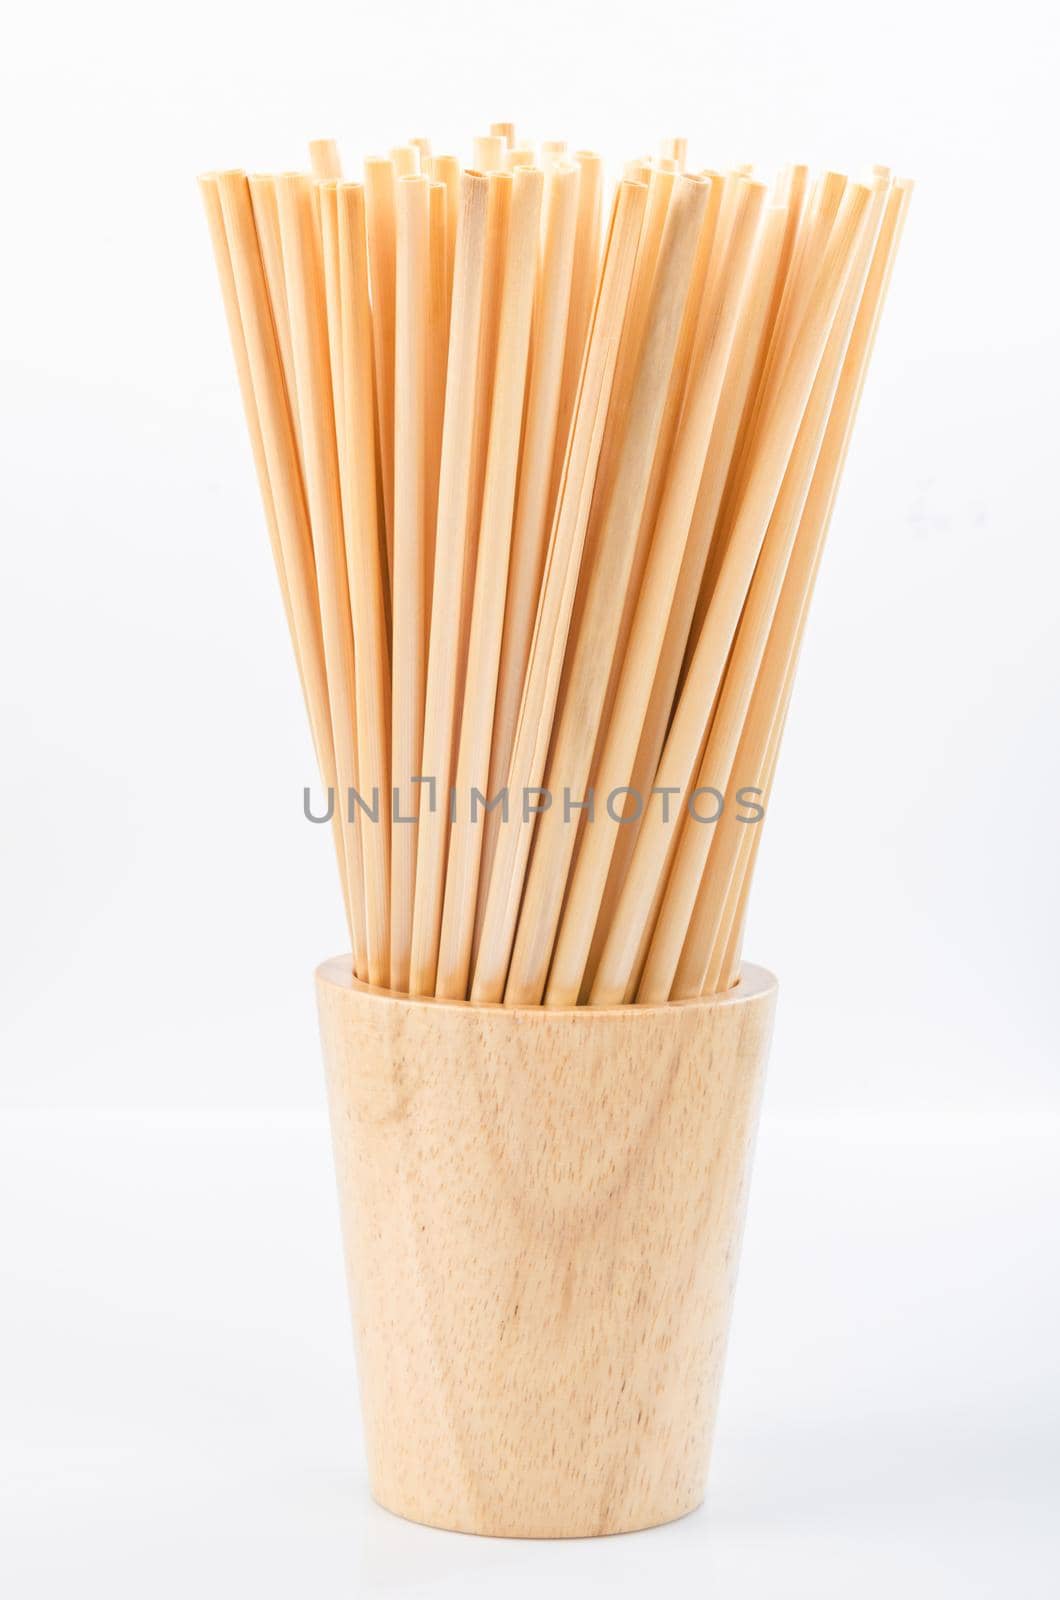 Wheat straw for drinking water in wooden glass on white background. Zero waste concept.